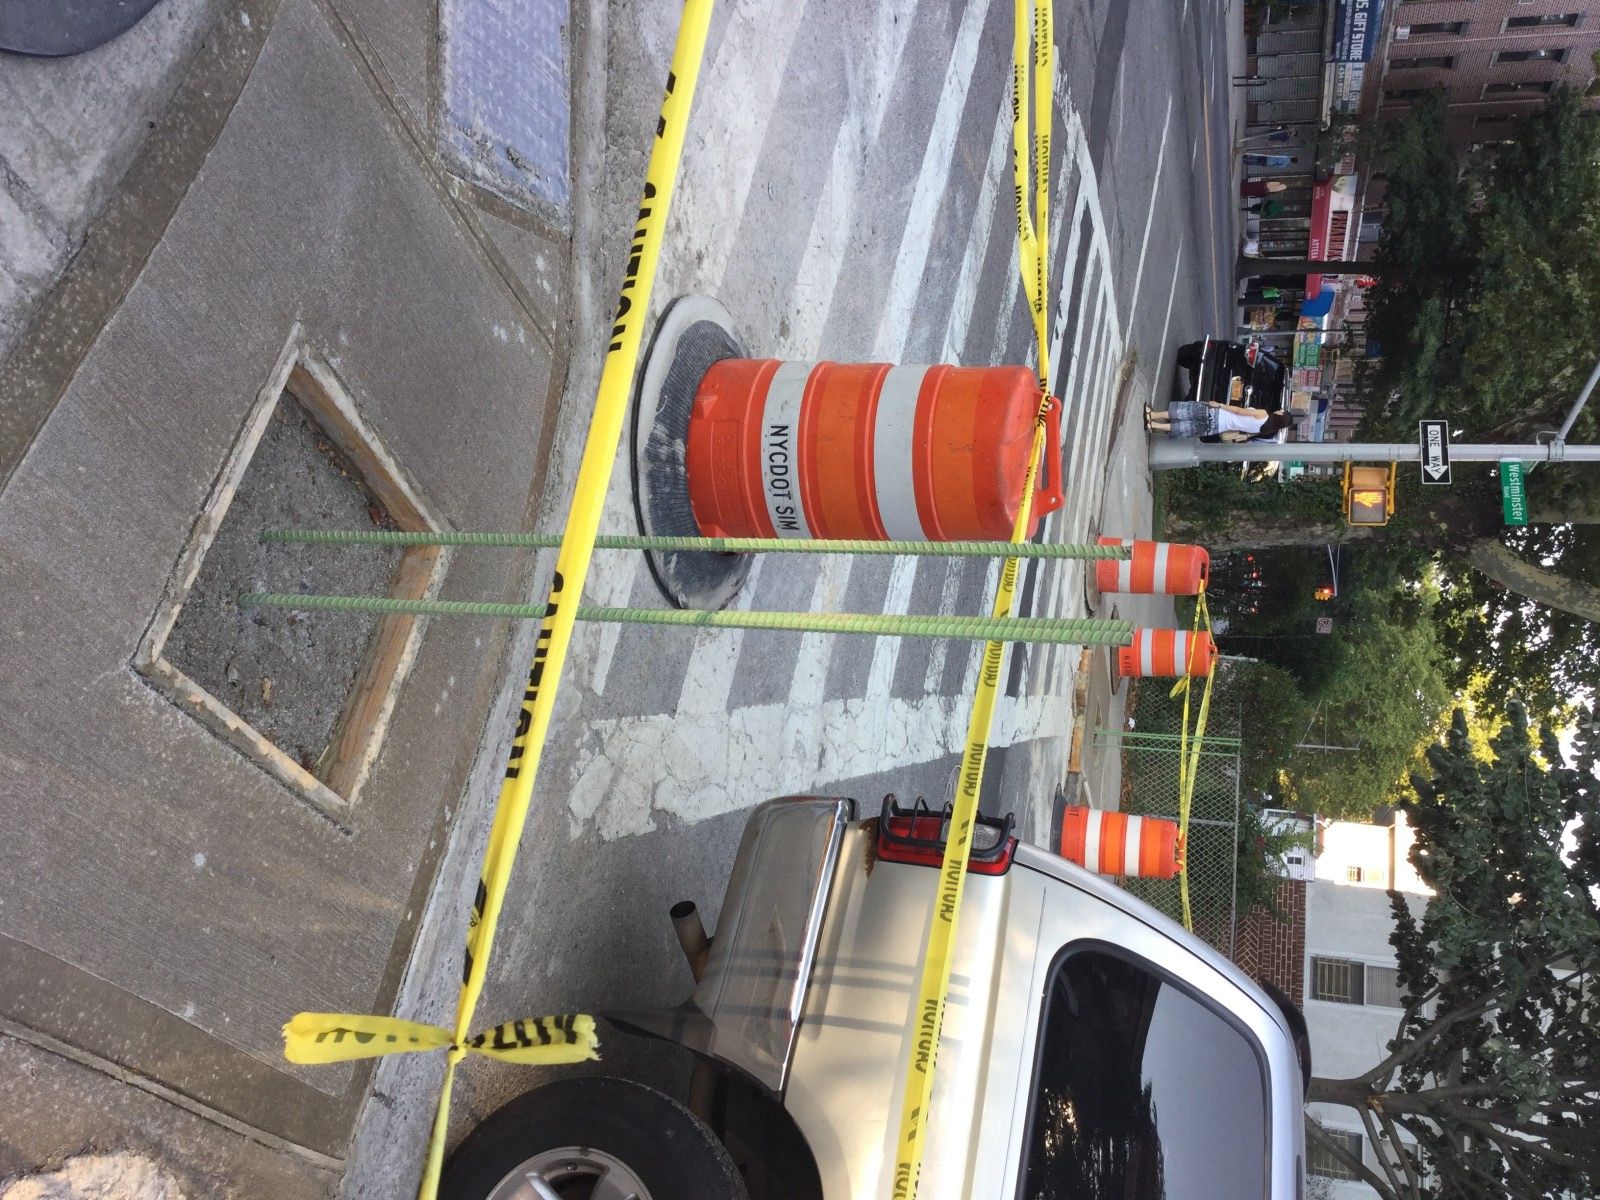 DOT Begins Work To Replace Neighborhood’s Historic Stanchions That The City Admitted Were Mistakenly Knocked Down